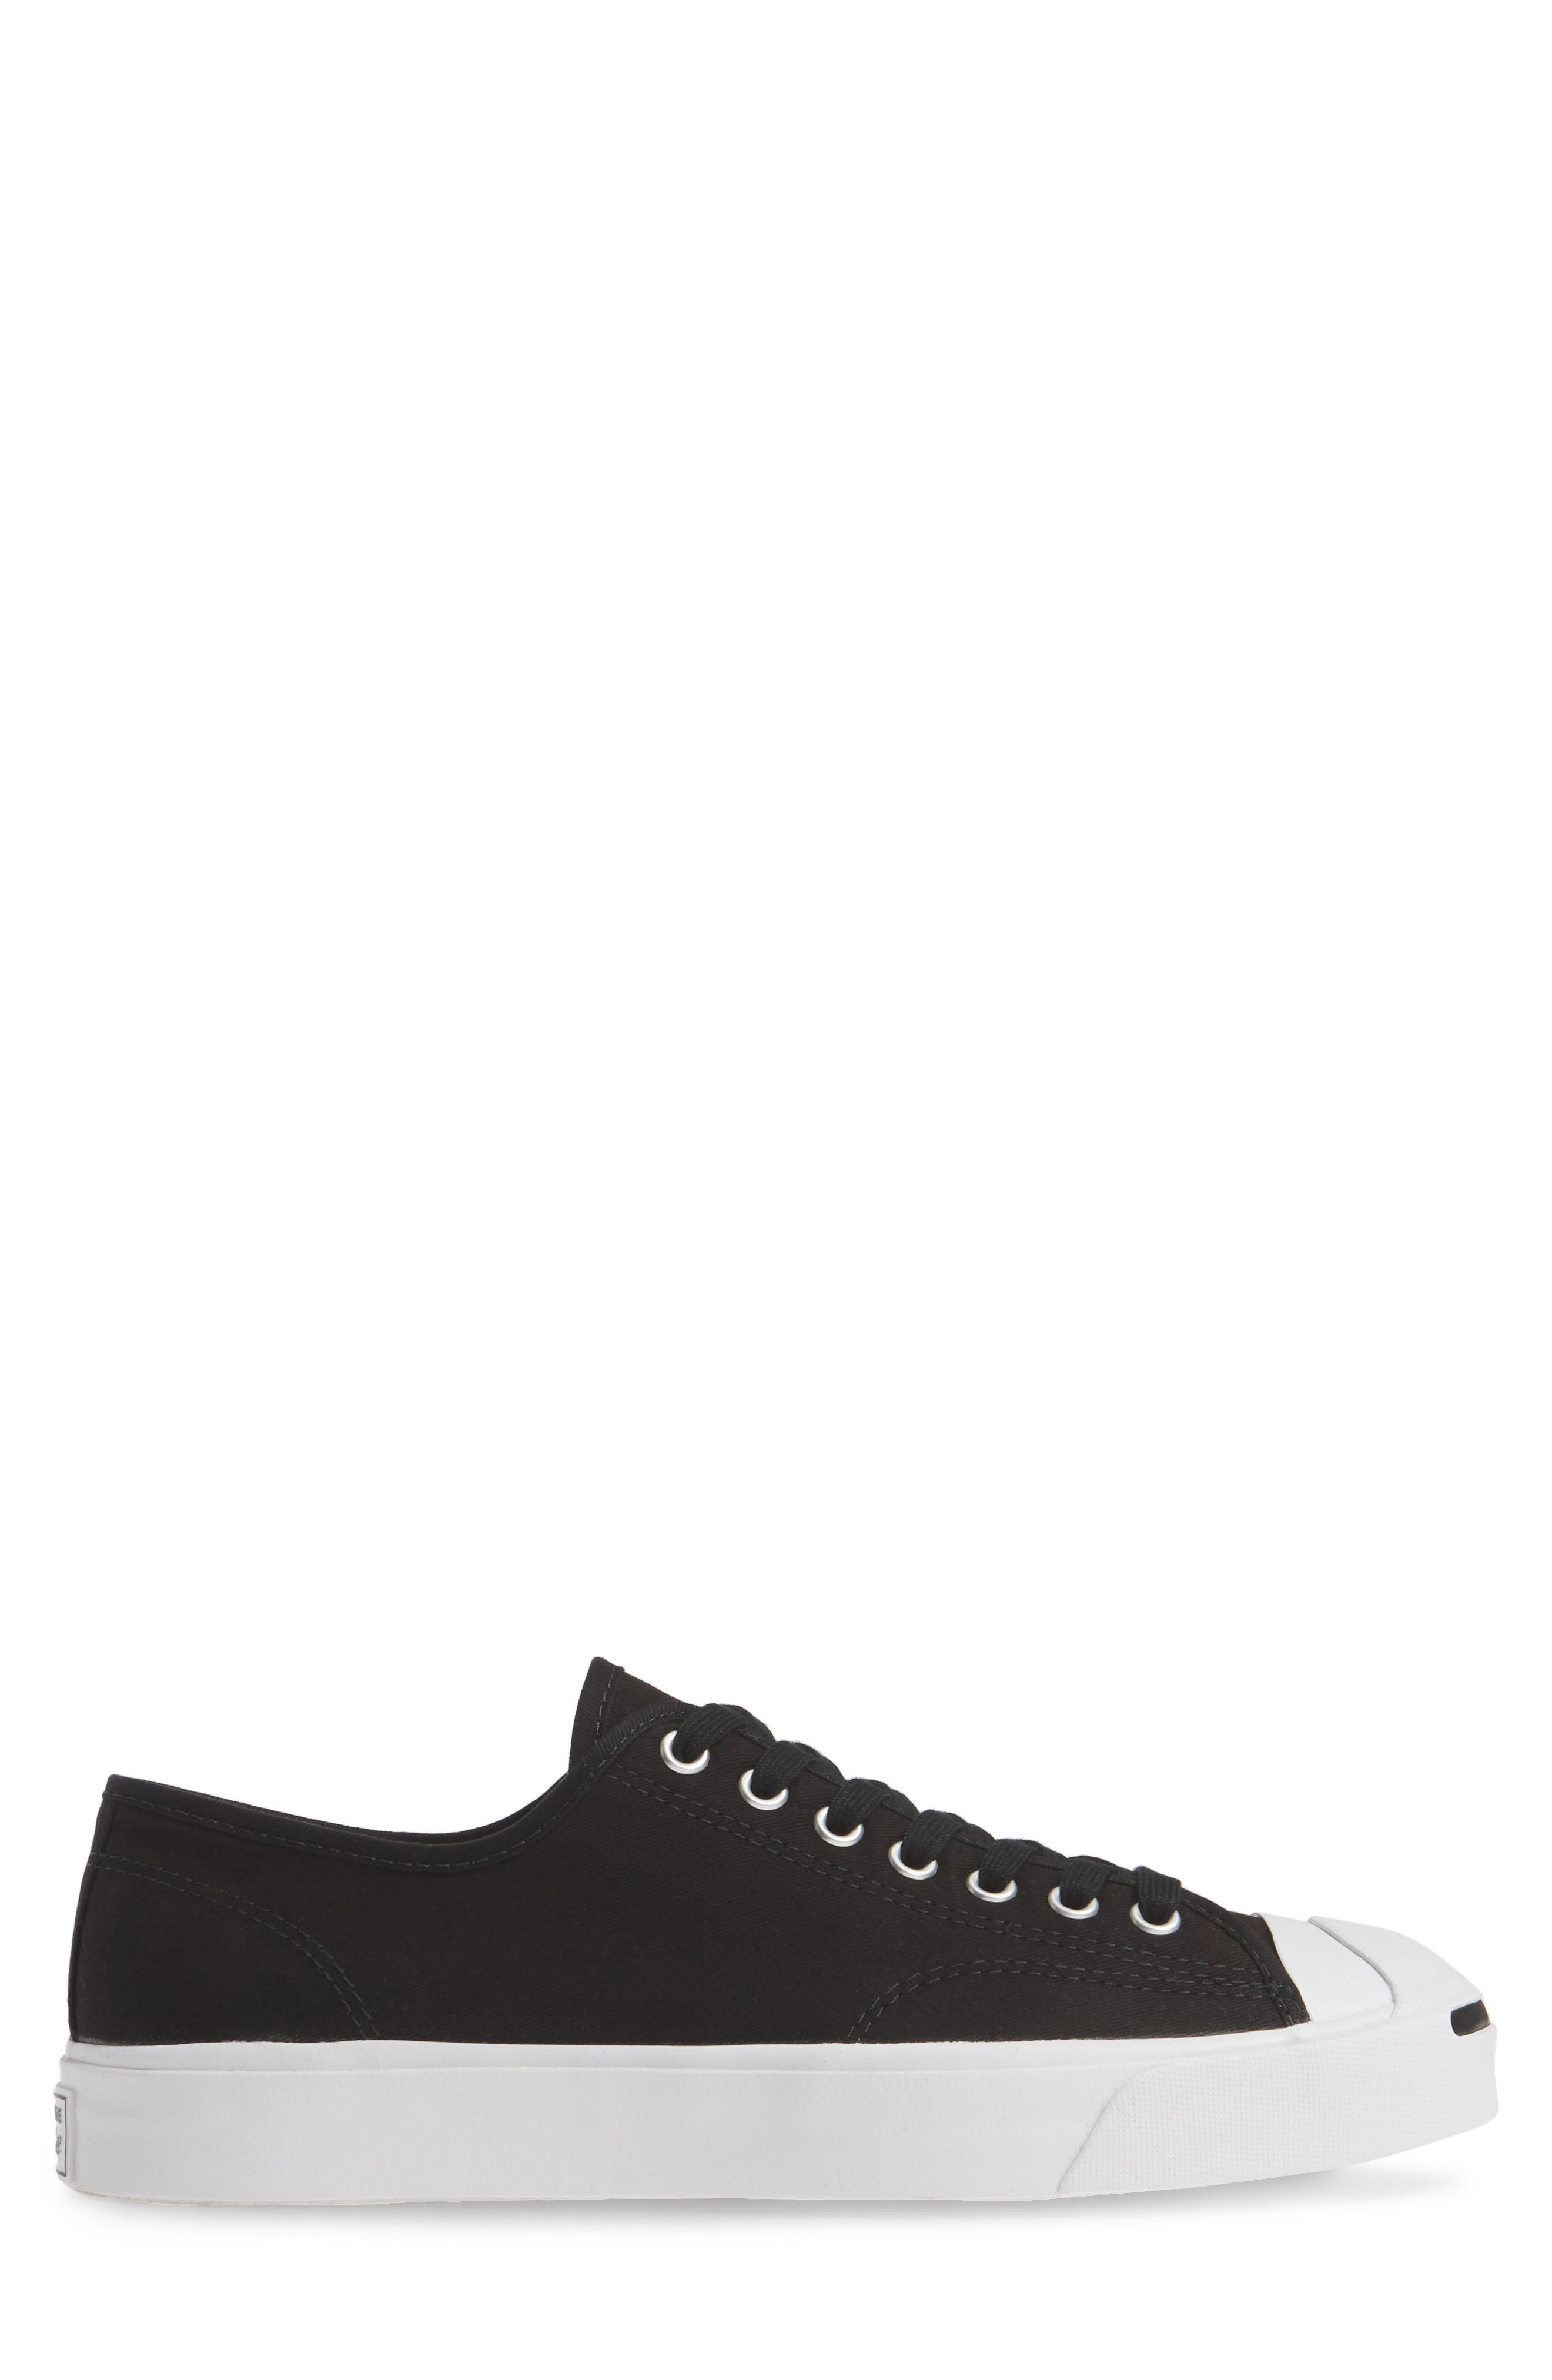 jack purcell jack ox